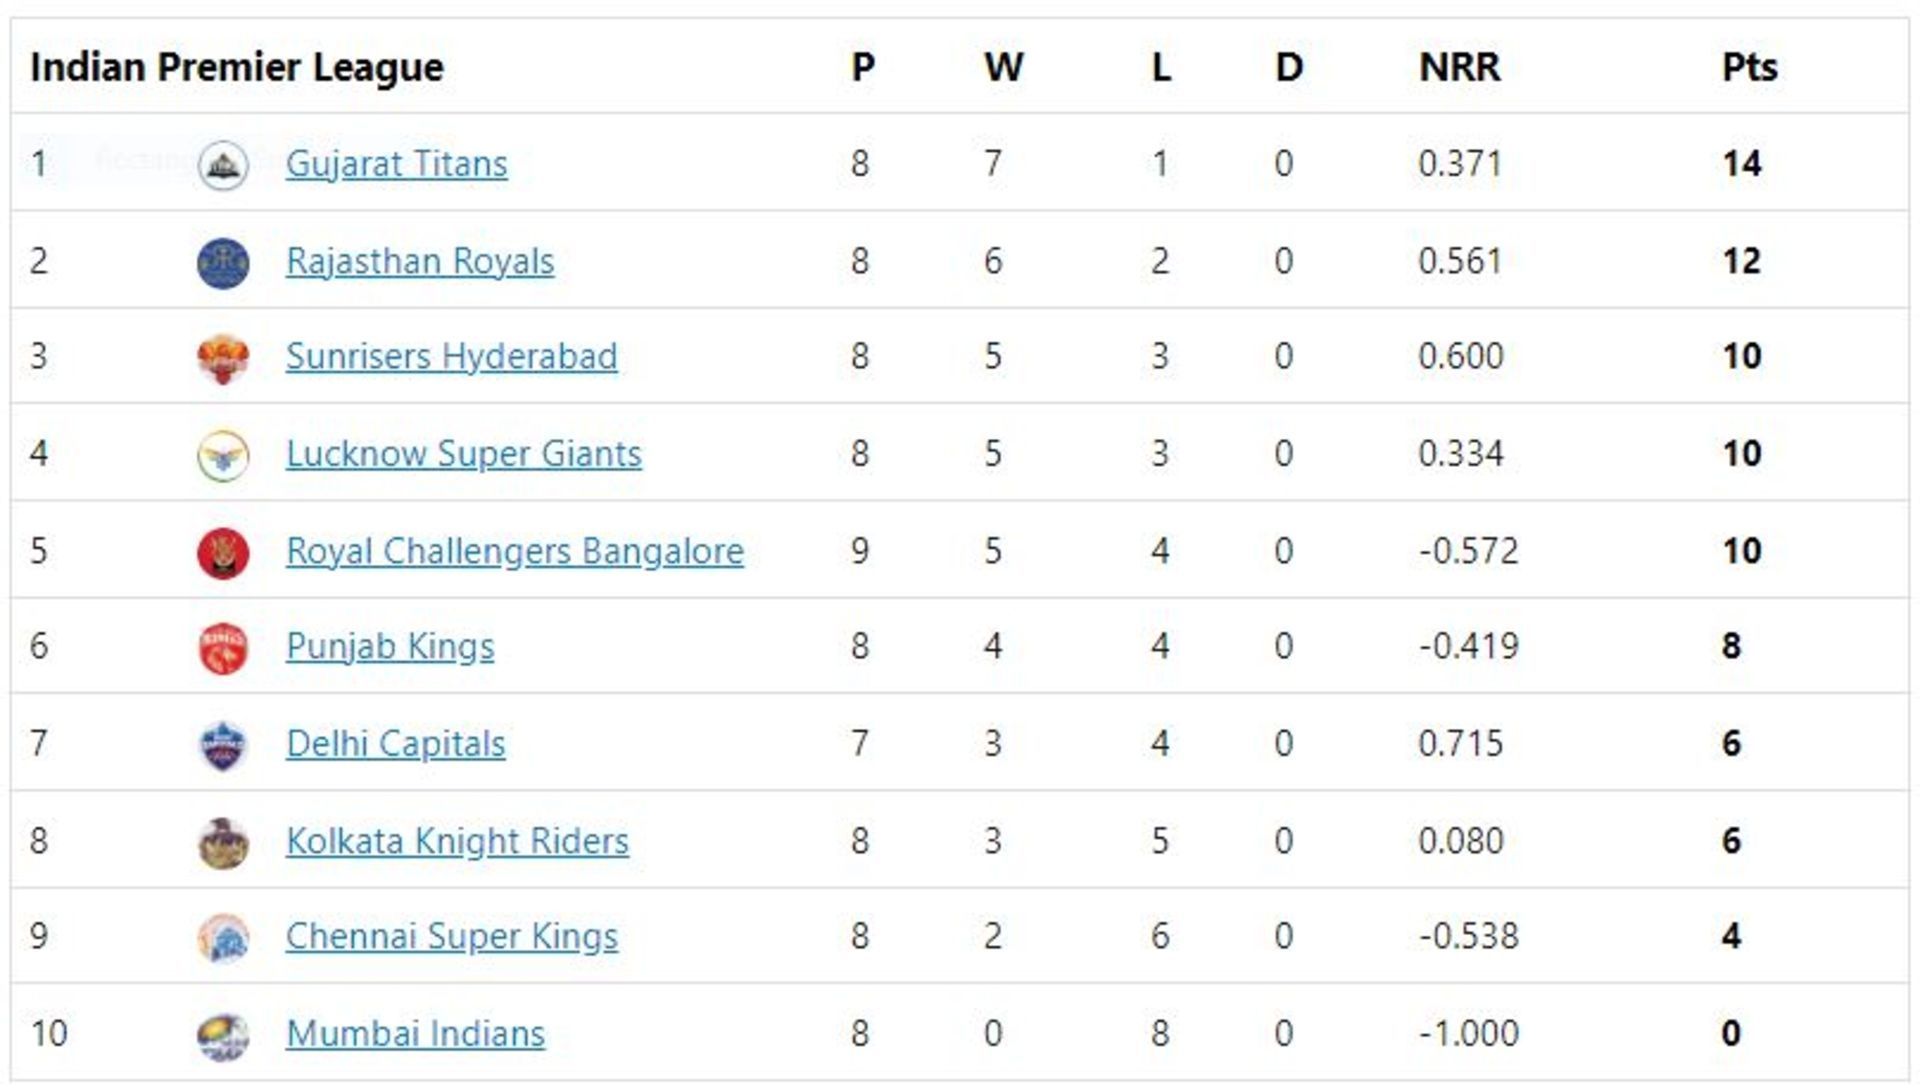 Gujarat Titans move to the top spot of the points table